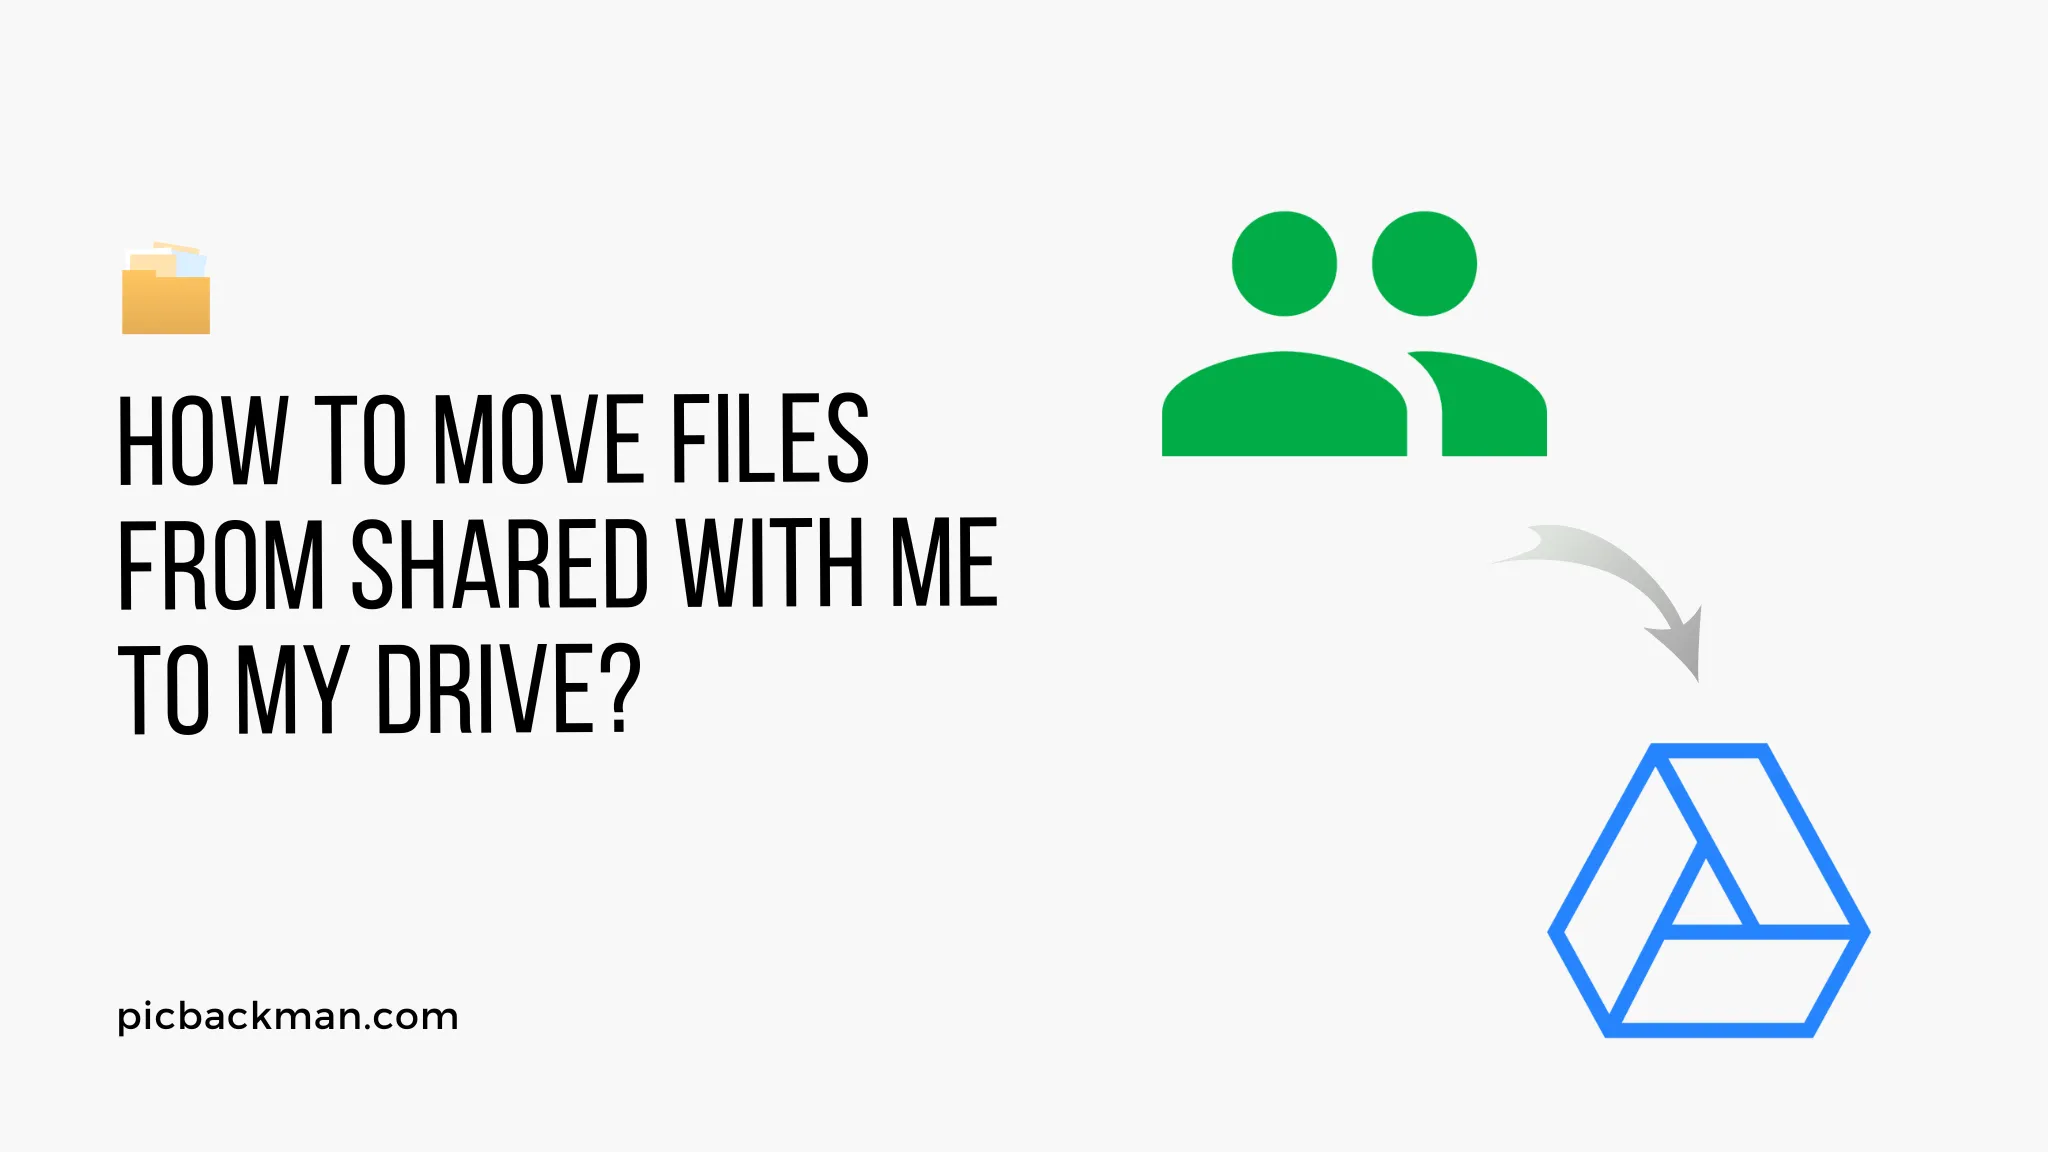 How to Move Files from Shared With Me to My Drive